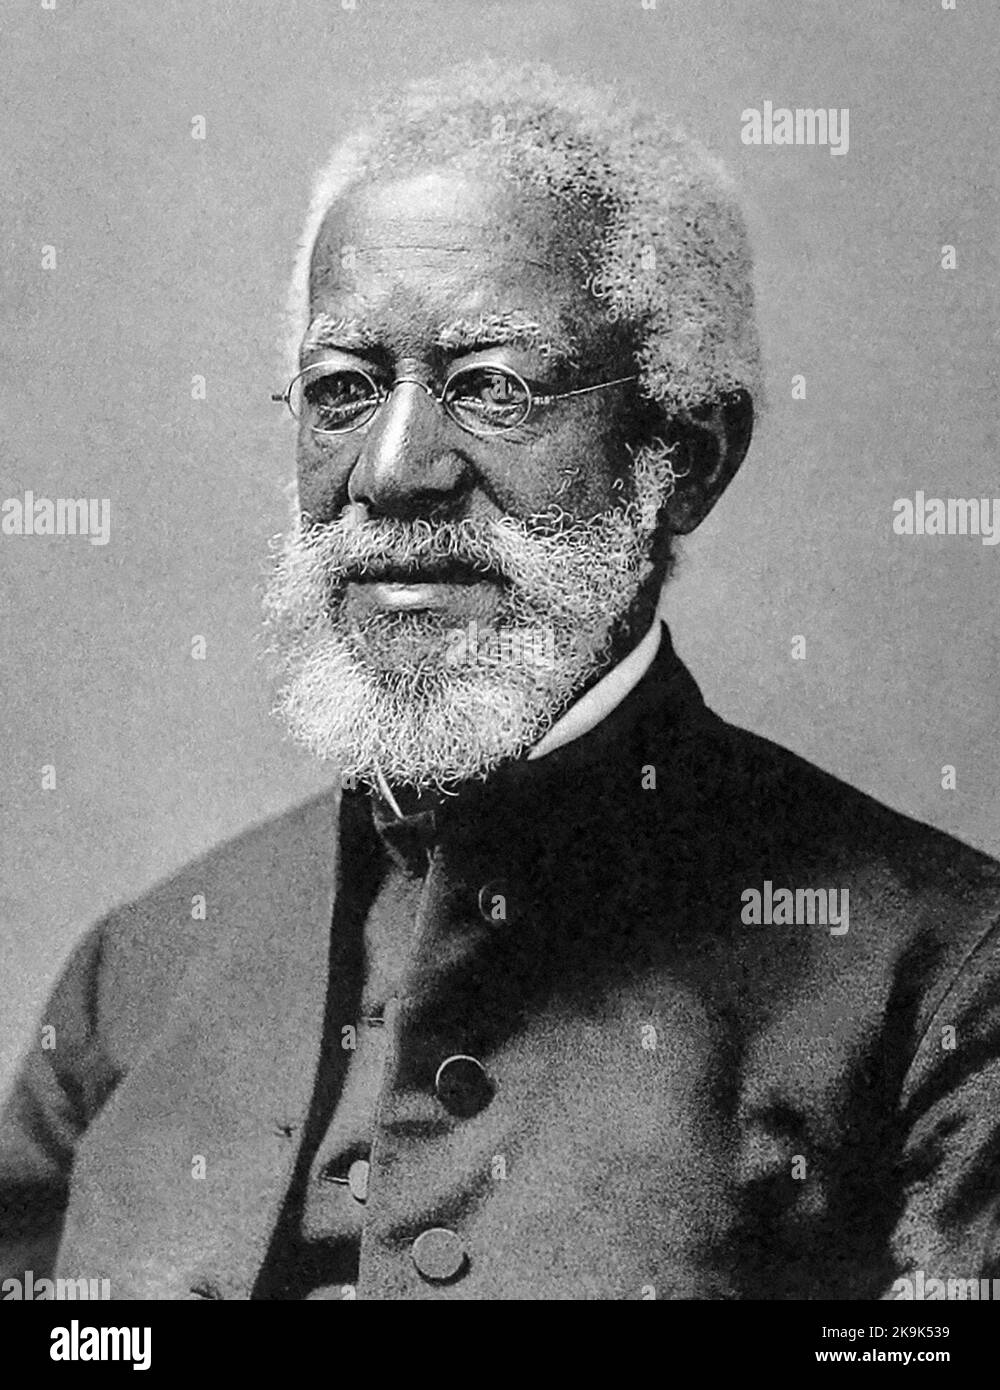 Alexander Crummell (1819–1898) was a pioneering African-American minister, academic, missionary to Liberia, and African nationalist. He was ordained as an Episcopal priest in the United States and went to England in the late 1840s to raise money for his church by lecturing about American slavery. Abolitionists, such as William Wilberforce,  supported his three years of study at Queens' College, Cambridge, where Crummell became the first officially recorded black graduate of Cambridge University. Stock Photo